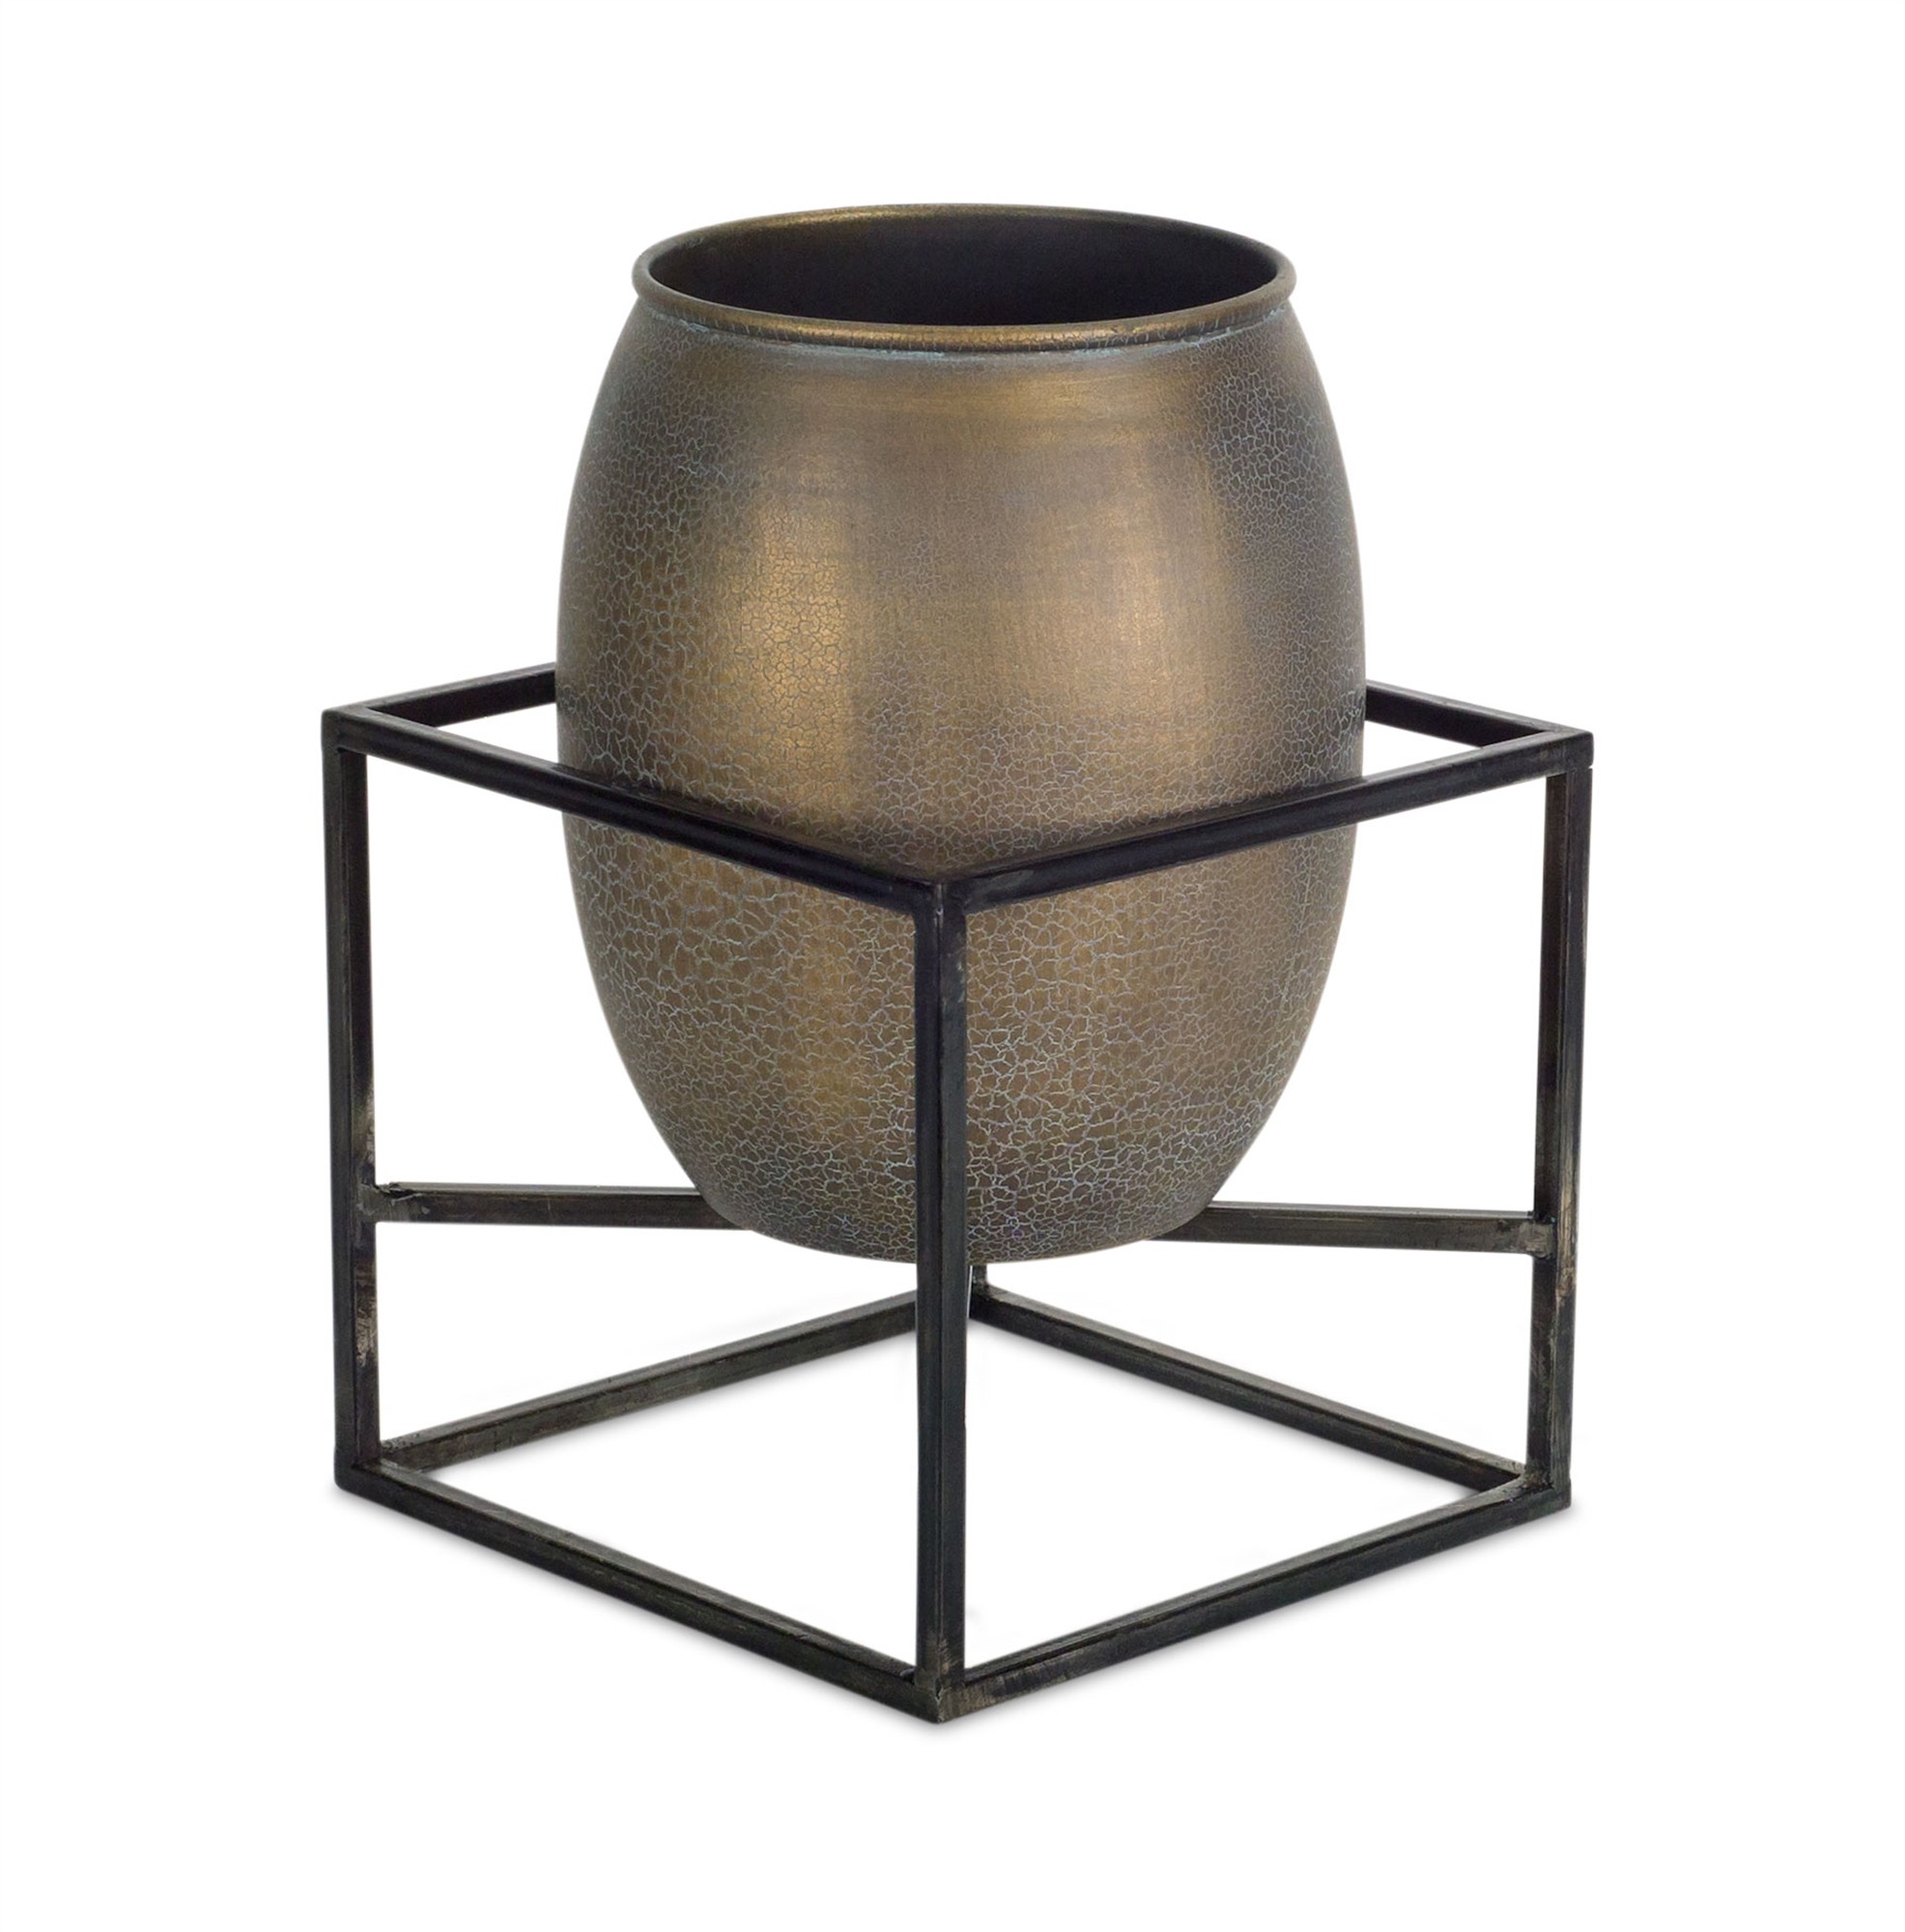 Pot with Stand (Set of 2) 6.25" x 9"H Metal